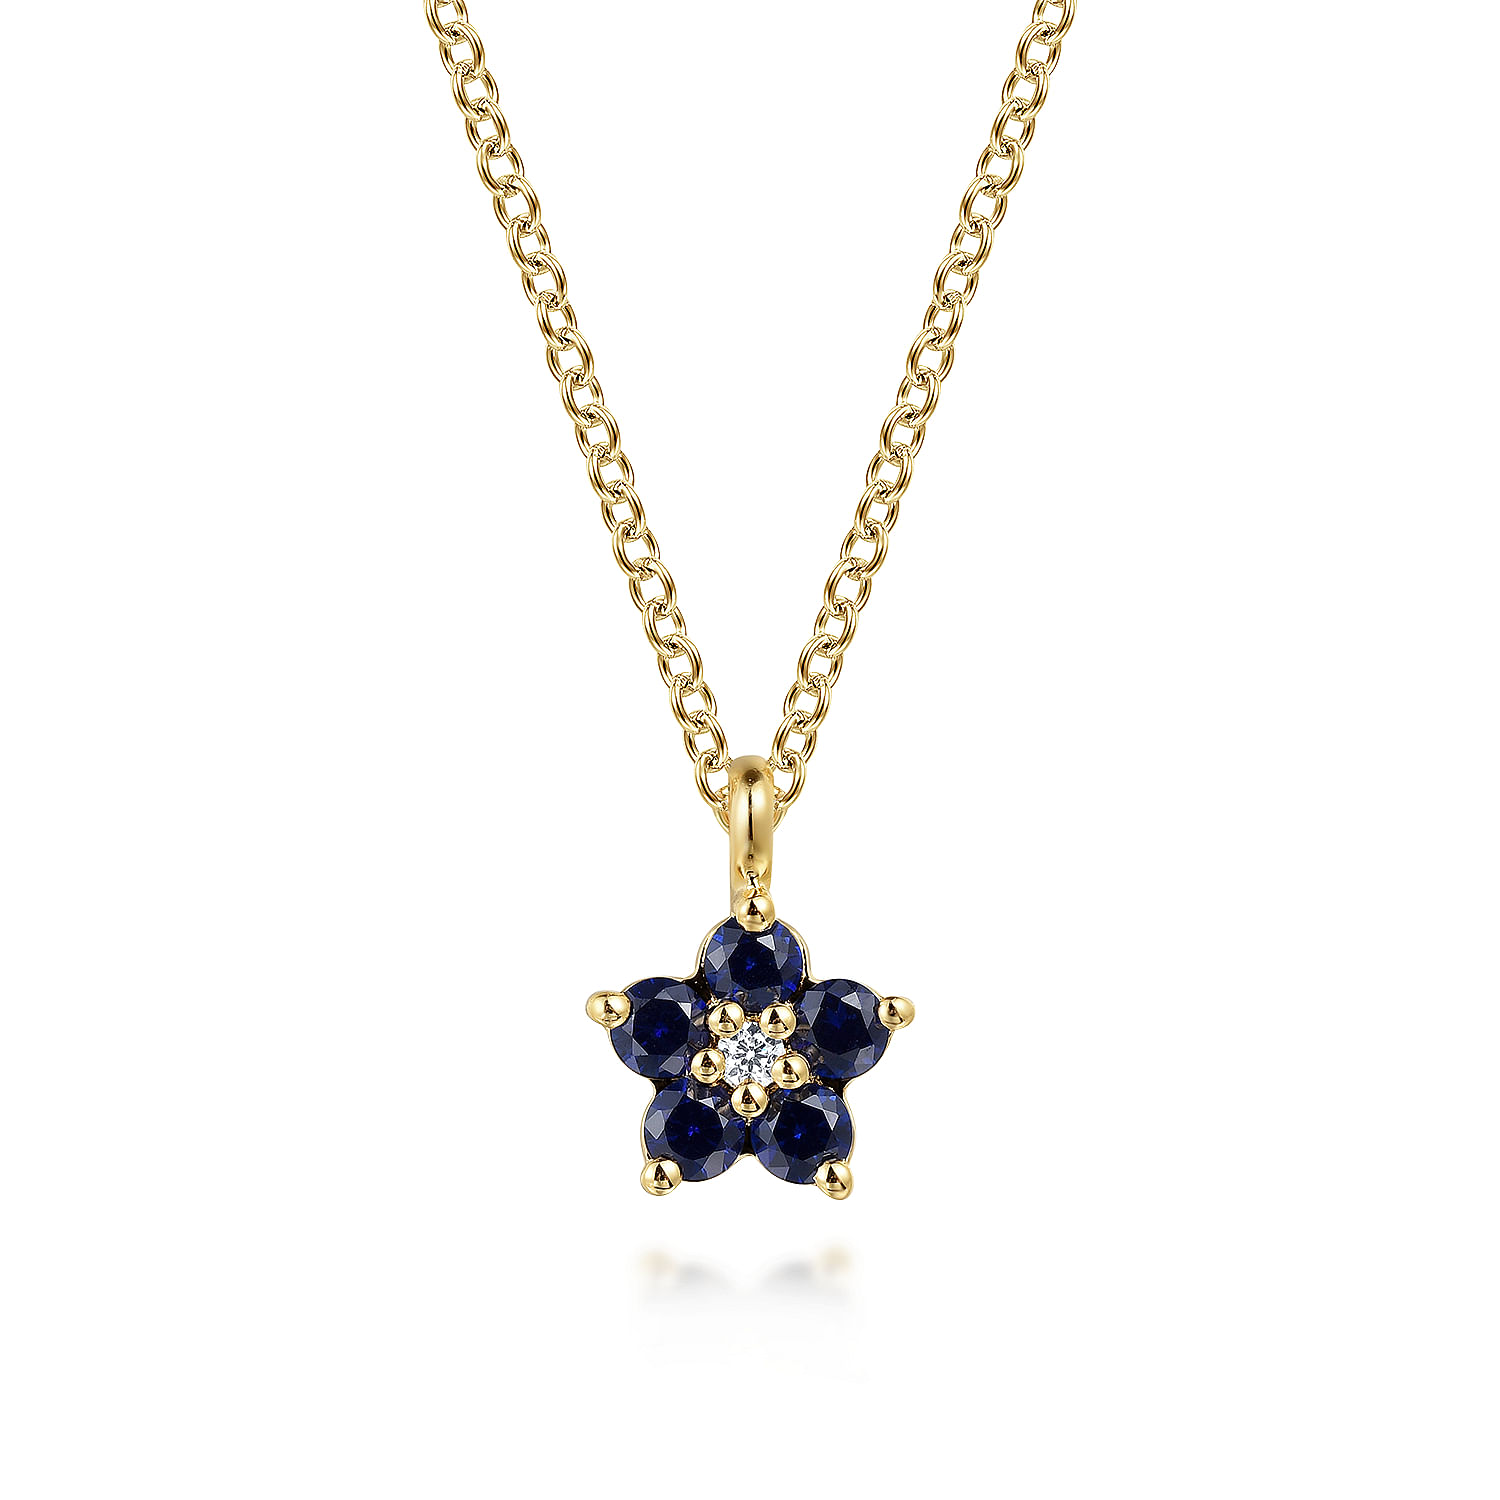 14K Yellow Gold Diamond and Sapphire Flower Pendant Necklace 